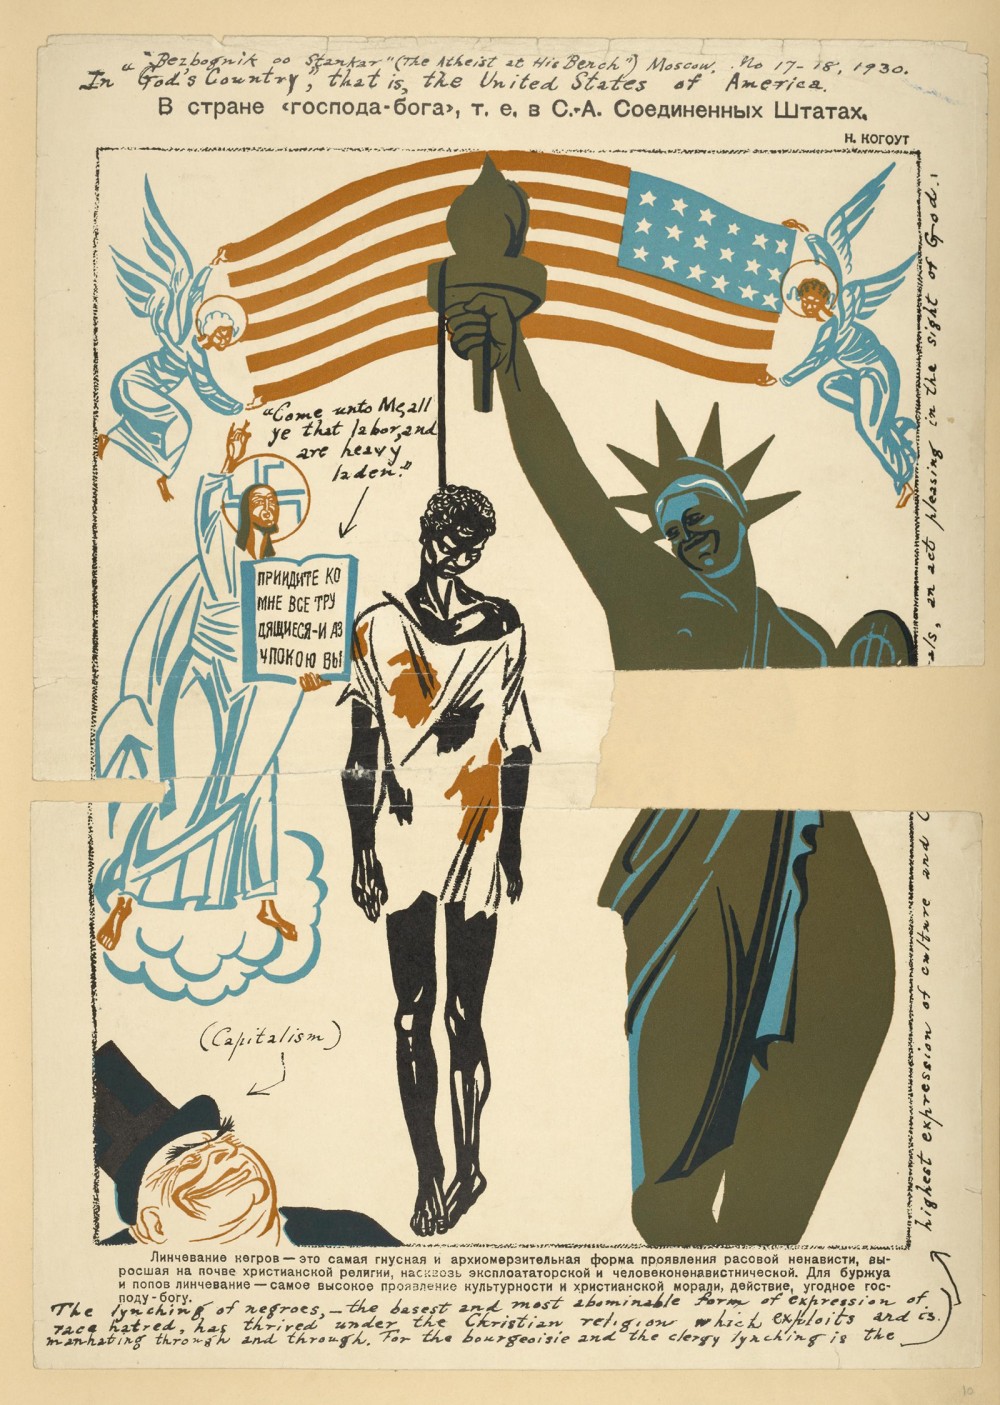 Soviet poster depicting a Black person lynched from the Statue of Liberty. The text, printed in Russian and hand-written in English reads, "In God's Country, that is, the United States of America, The Lynching of negroes-the basest and most abominable form of expression of race hatred has thrived under the Christian religion which exploits and is man-hating through and through. For the borgeoisie and the clergy, lynching is the highest expression of culture and [cut off] an act pleasing in the sight of God."